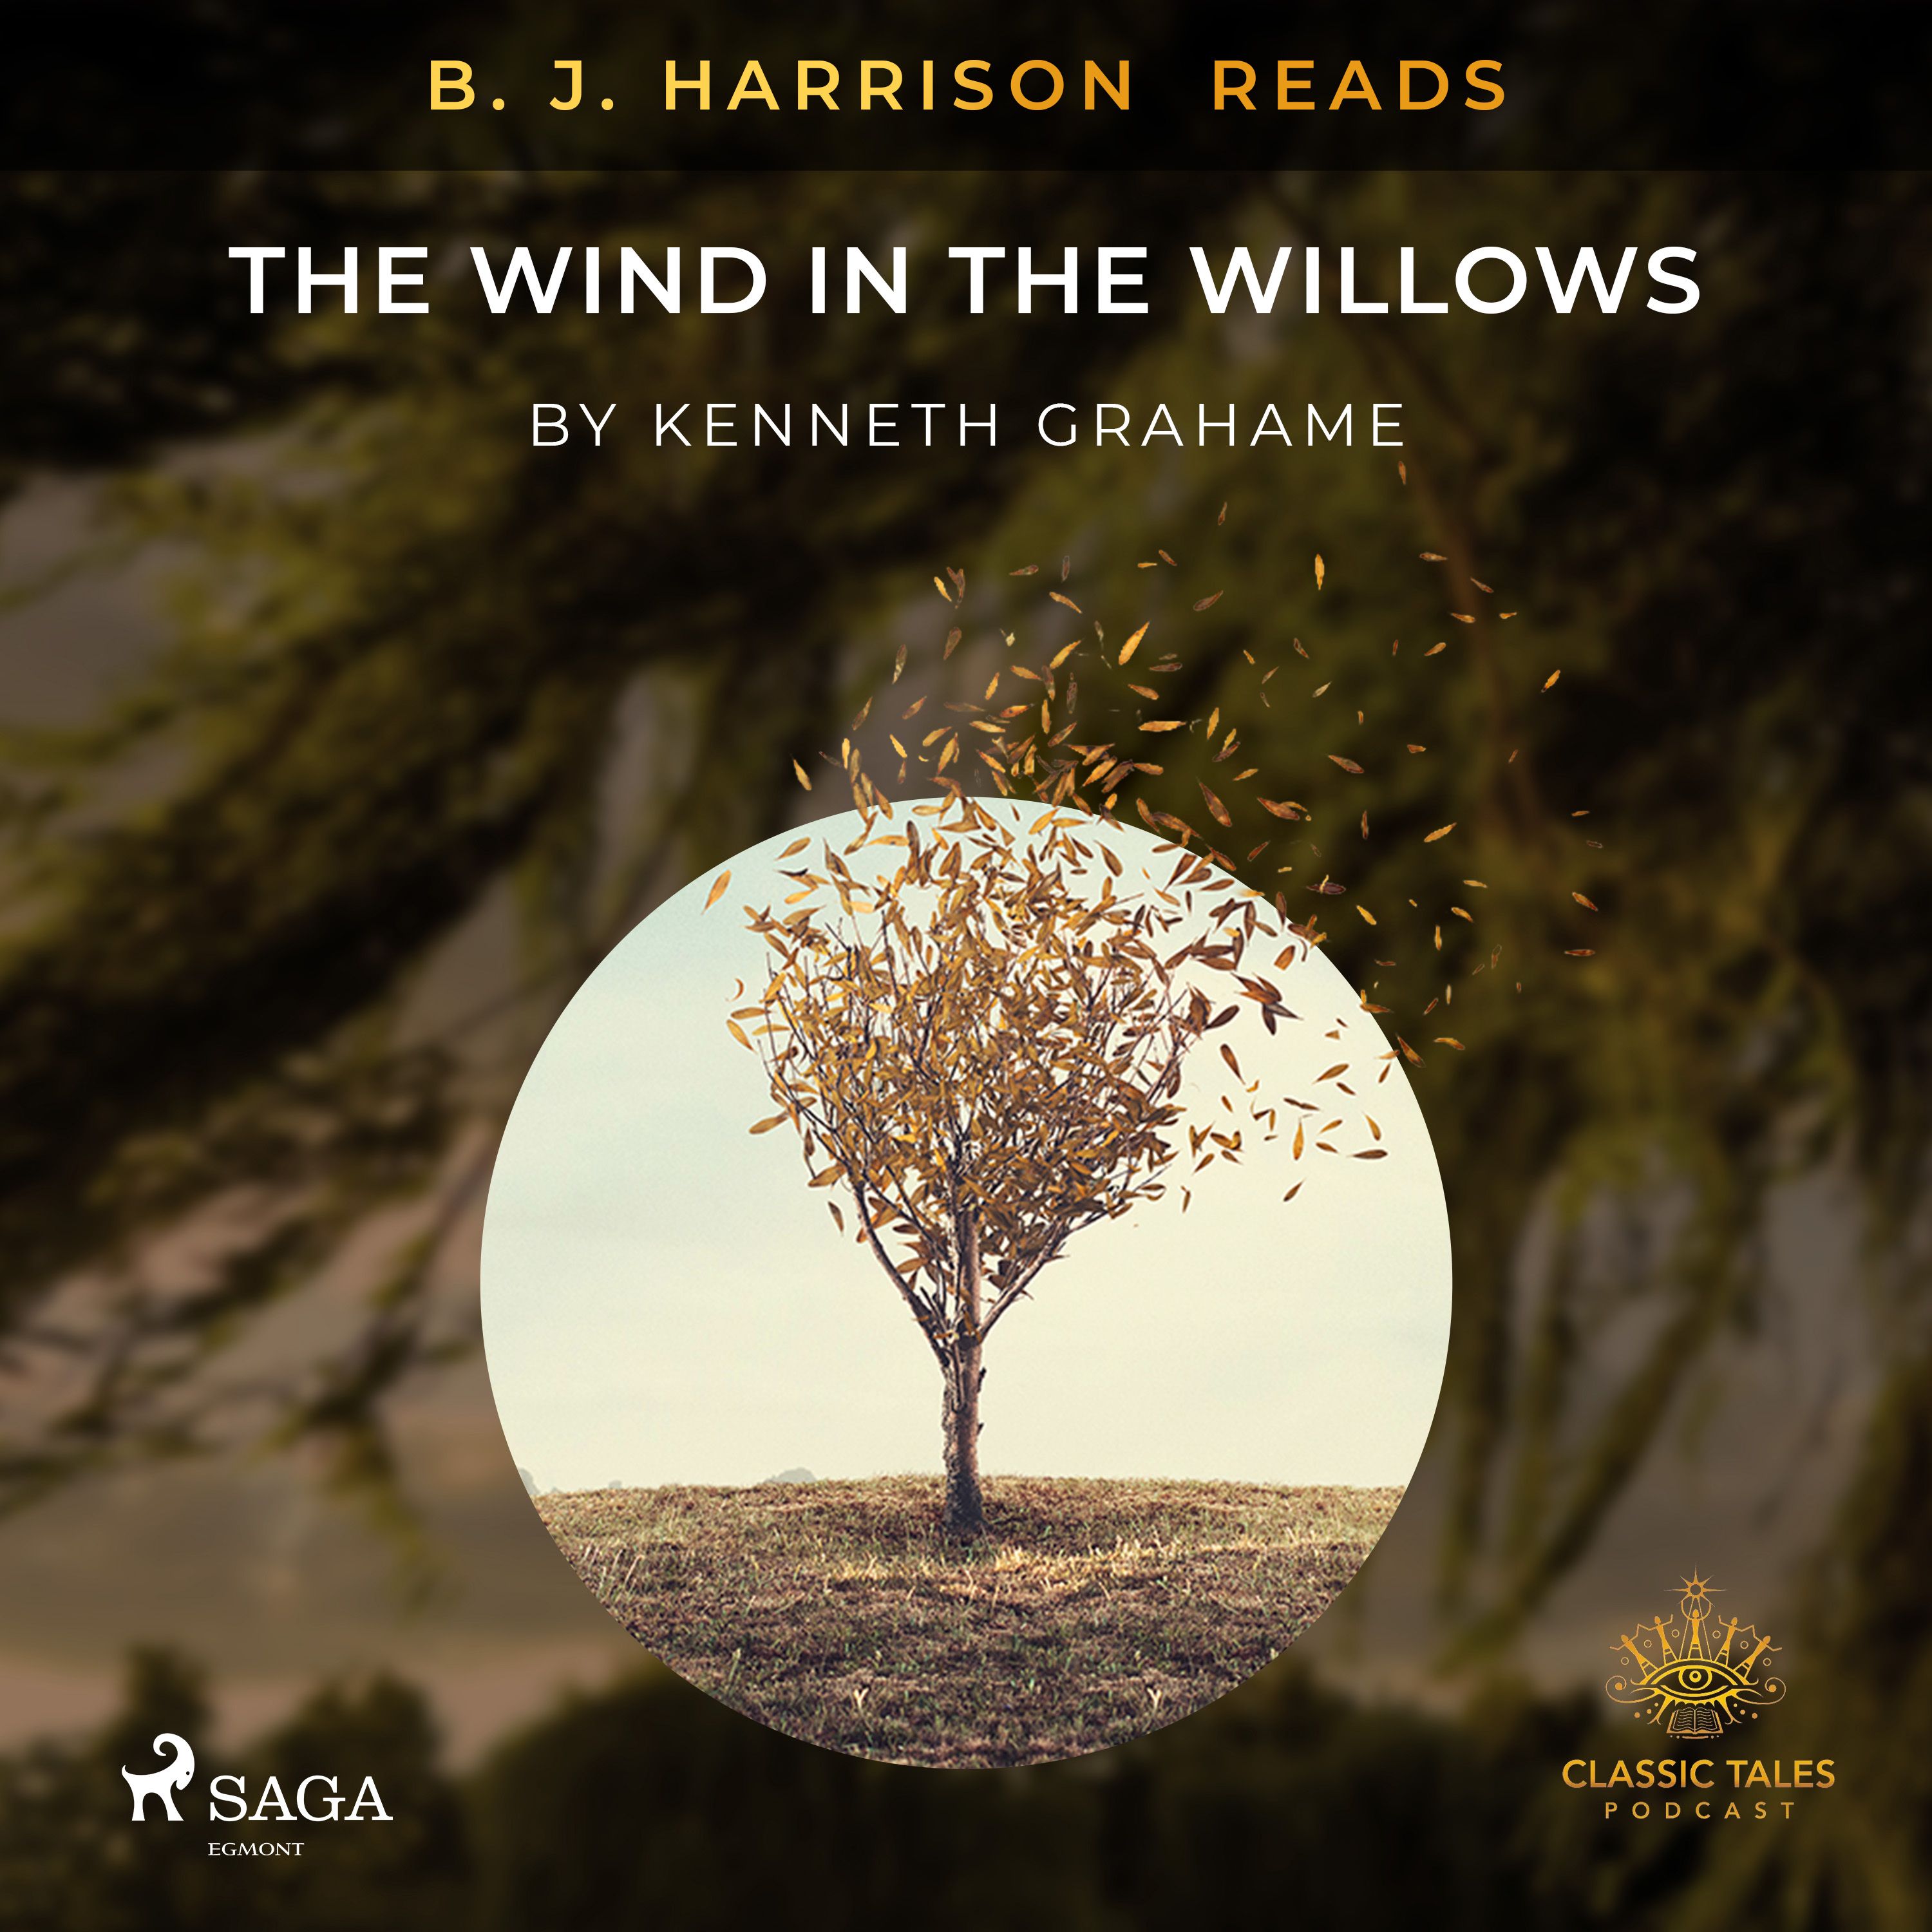 B. J. Harrison Reads The Wind in the Willows, audiobook by Kenneth Grahame